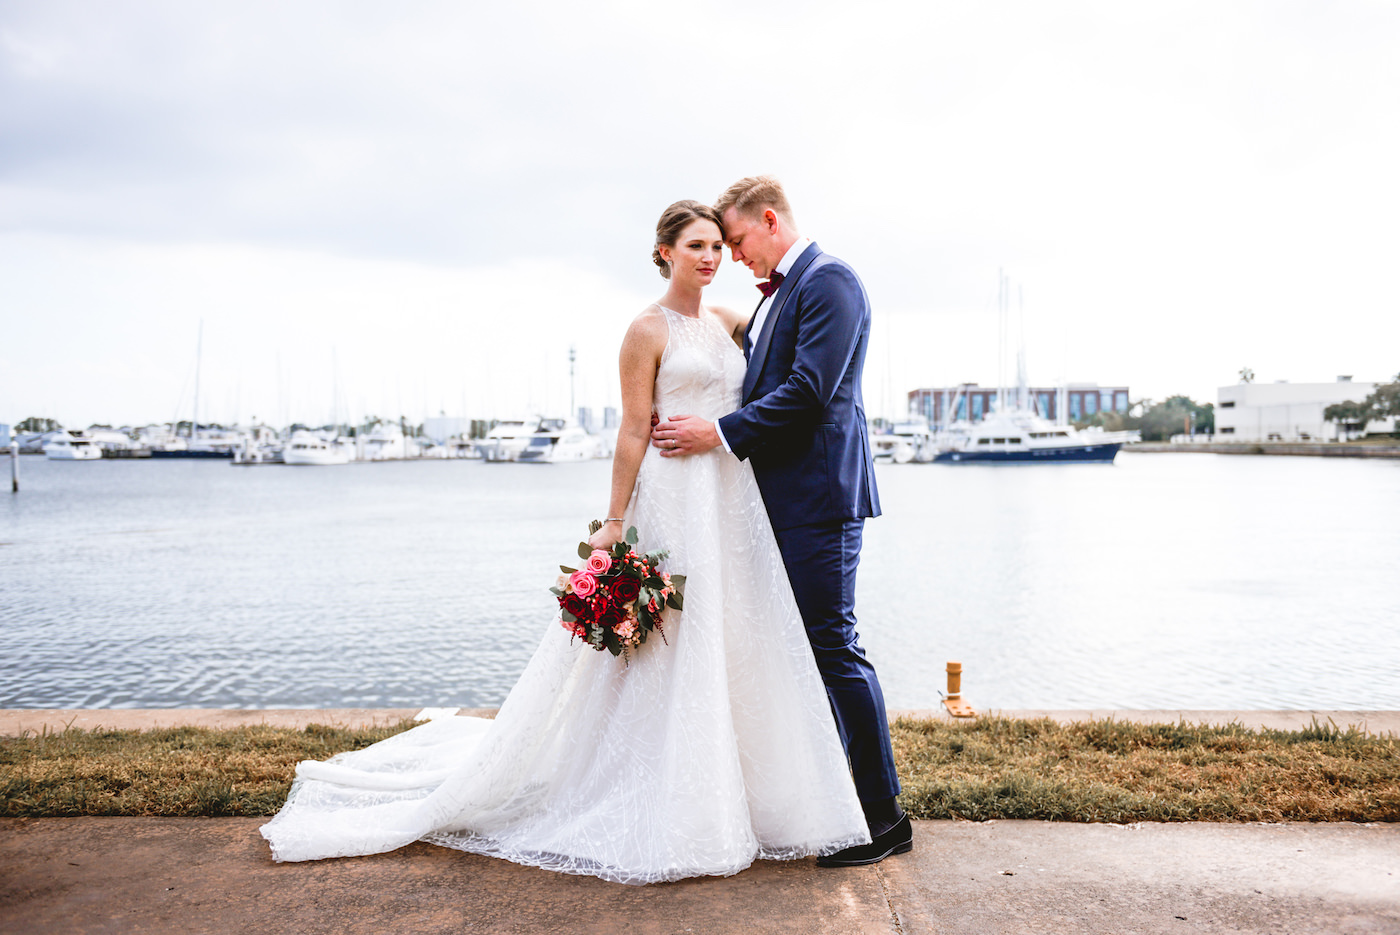 Bride and Groom Outdoor Waterfront Portrait at St. Pete Wedding Venue The Poynter Institute | White Embroidered Organza Ballgown Illusion Neck Bib Neckline Bridal Gown | Groom Classic Navy Blue Suit | Tampa Wedding Dress Shop Truly Forever Bridal